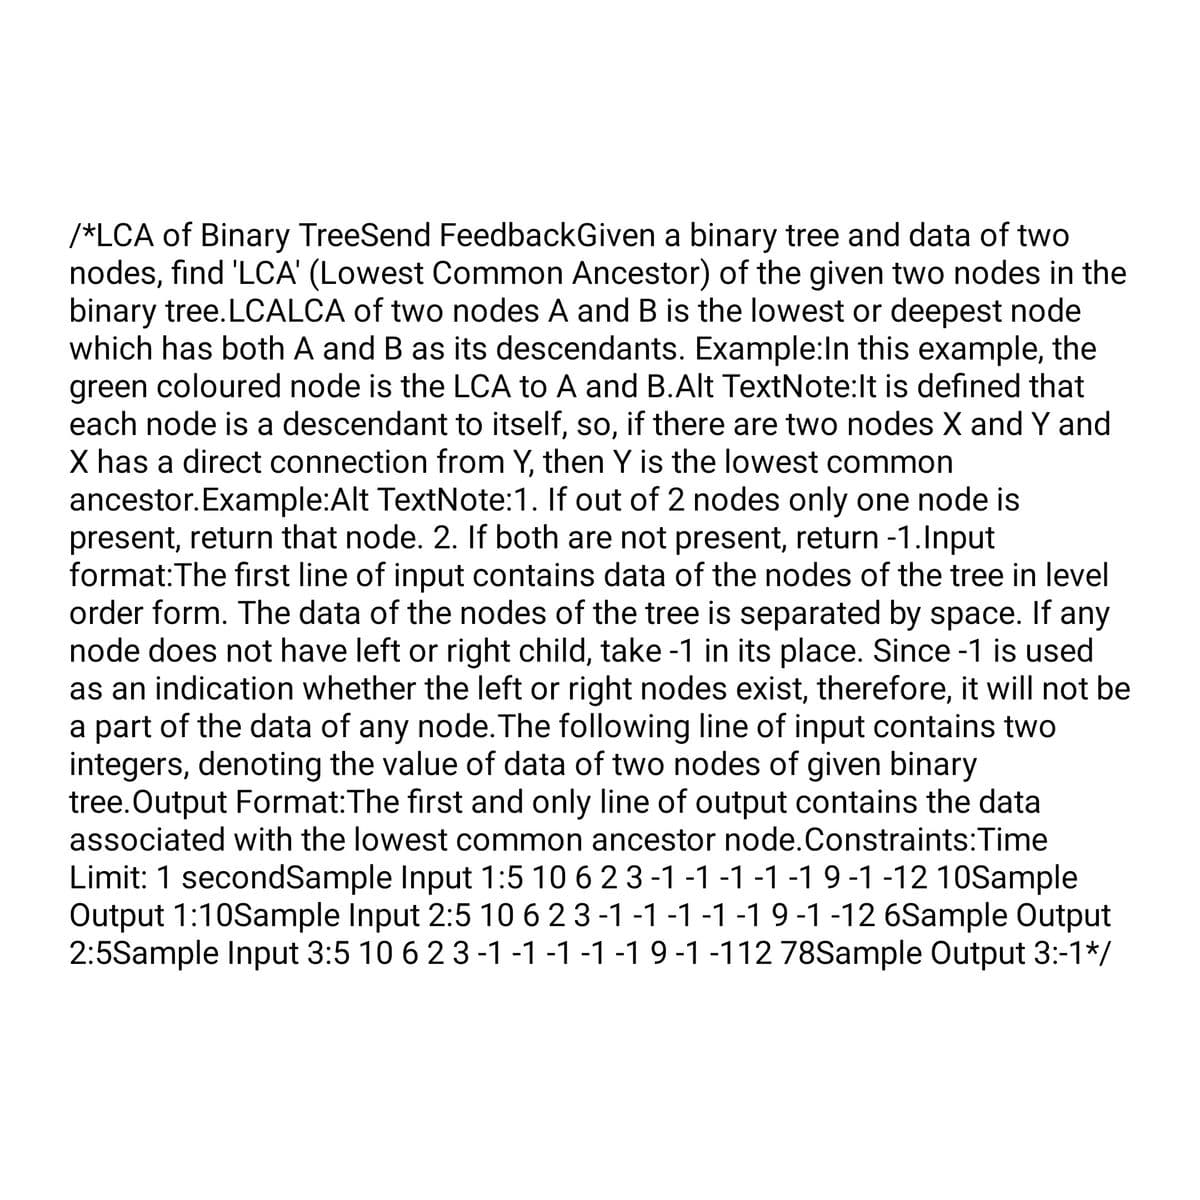 /*LCA of Binary TreeSend FeedbackGiven a binary tree and data of two
nodes, find 'LCA' (Lowest Common Ancestor) of the given two nodes in the
binary tree.LCALCA of two nodes A and B is the lowest or deepest node
which has both A and B as its descendants. Example: In this example, the
green coloured node is the LCA to A and B.Alt TextNote:It is defined that
each node is a descendant to itself, so, if there are two nodes X and Y and
X has a direct connection from Y, then Y is the lowest common
ancestor. Example:Alt TextNote: 1. If out of 2 nodes only one node is
present, return that node. 2. If both are not present, return -1.Input
format: The first line of input contains data of the nodes of the tree in level
order form. The data of the nodes of the tree is separated by space. If any
node does not have left or right child, take -1 in its place. Since -1 is used
as an indication whether the left or right nodes exist, therefore, it will not be
a part of the data of any node. The following line of input contains two
integers, denoting the value of data of two nodes of given binary
tree.Output Format:The first and only line of output contains the data
associated with the lowest common ancestor node.Constraints: Time
Limit: 1 secondSample Input 1:5 10 6 2 3 -1 -1 -1 -1 -1 9 -1 -12 10Sample
Output 1:10Sample Input 2:5 10 6 2 3-1 -1 -1 -1 -1 9 -1 -12 6Sample Output
2:5Sample Input 3:5 10 6 2 3 -1 -1 -1 -1 -1 9 -1 -112 78Sample Output 3:-1*/